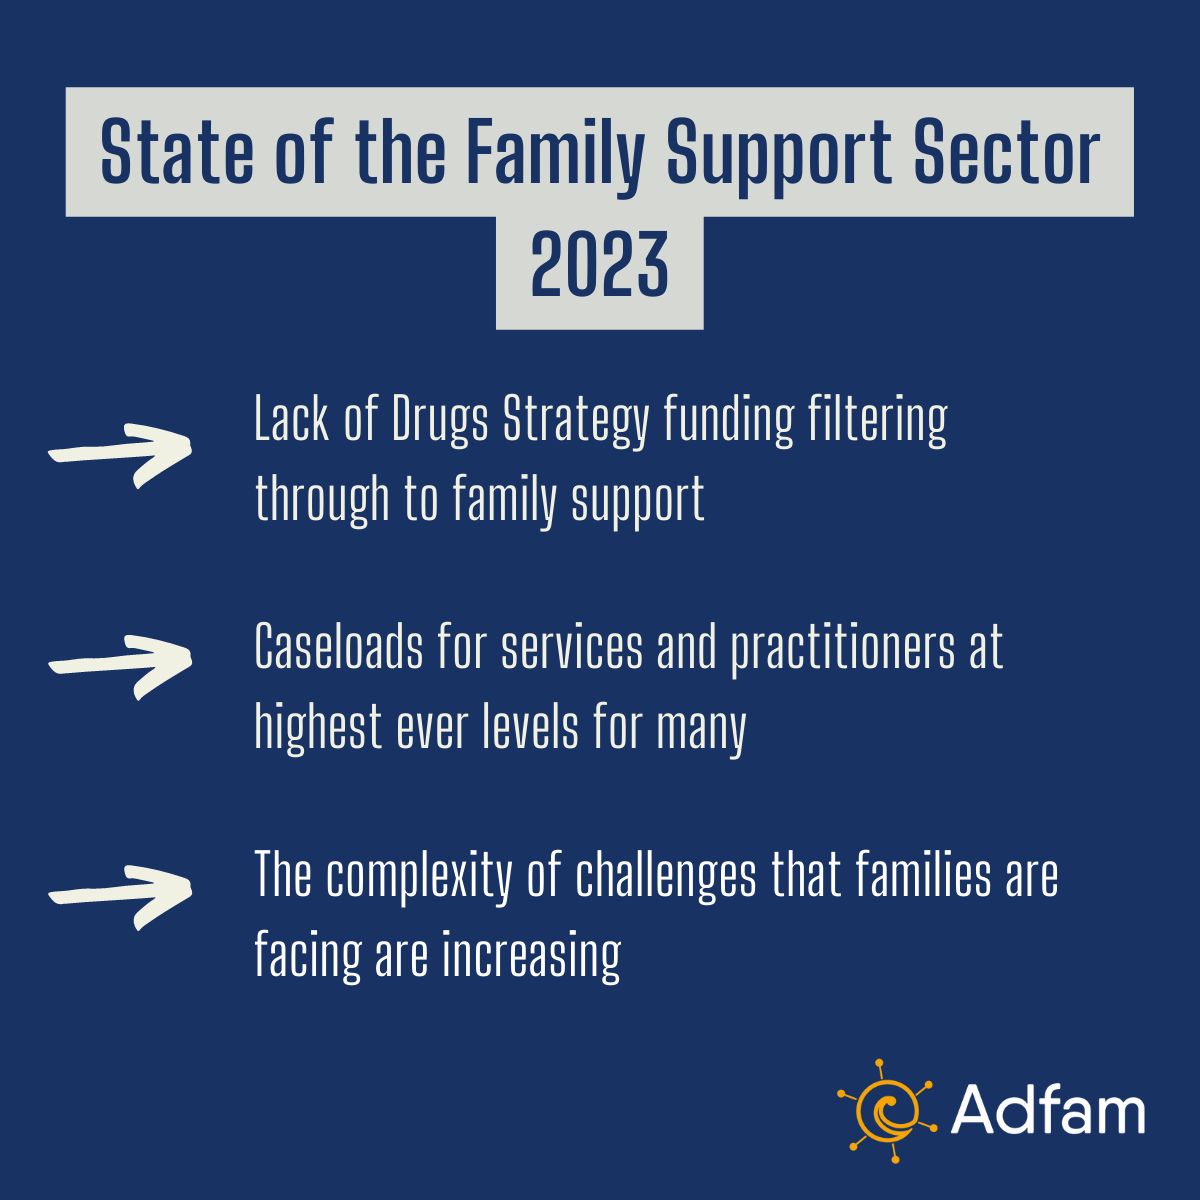 “We currently have our longest waiting list in our history. Indications are this will continue to be an issue.” Family services are seeing an increase in caseloads, growing complexity whilst losing staff. Learn more from our State of the Sector 2023 report bit.ly/3PCt9kr